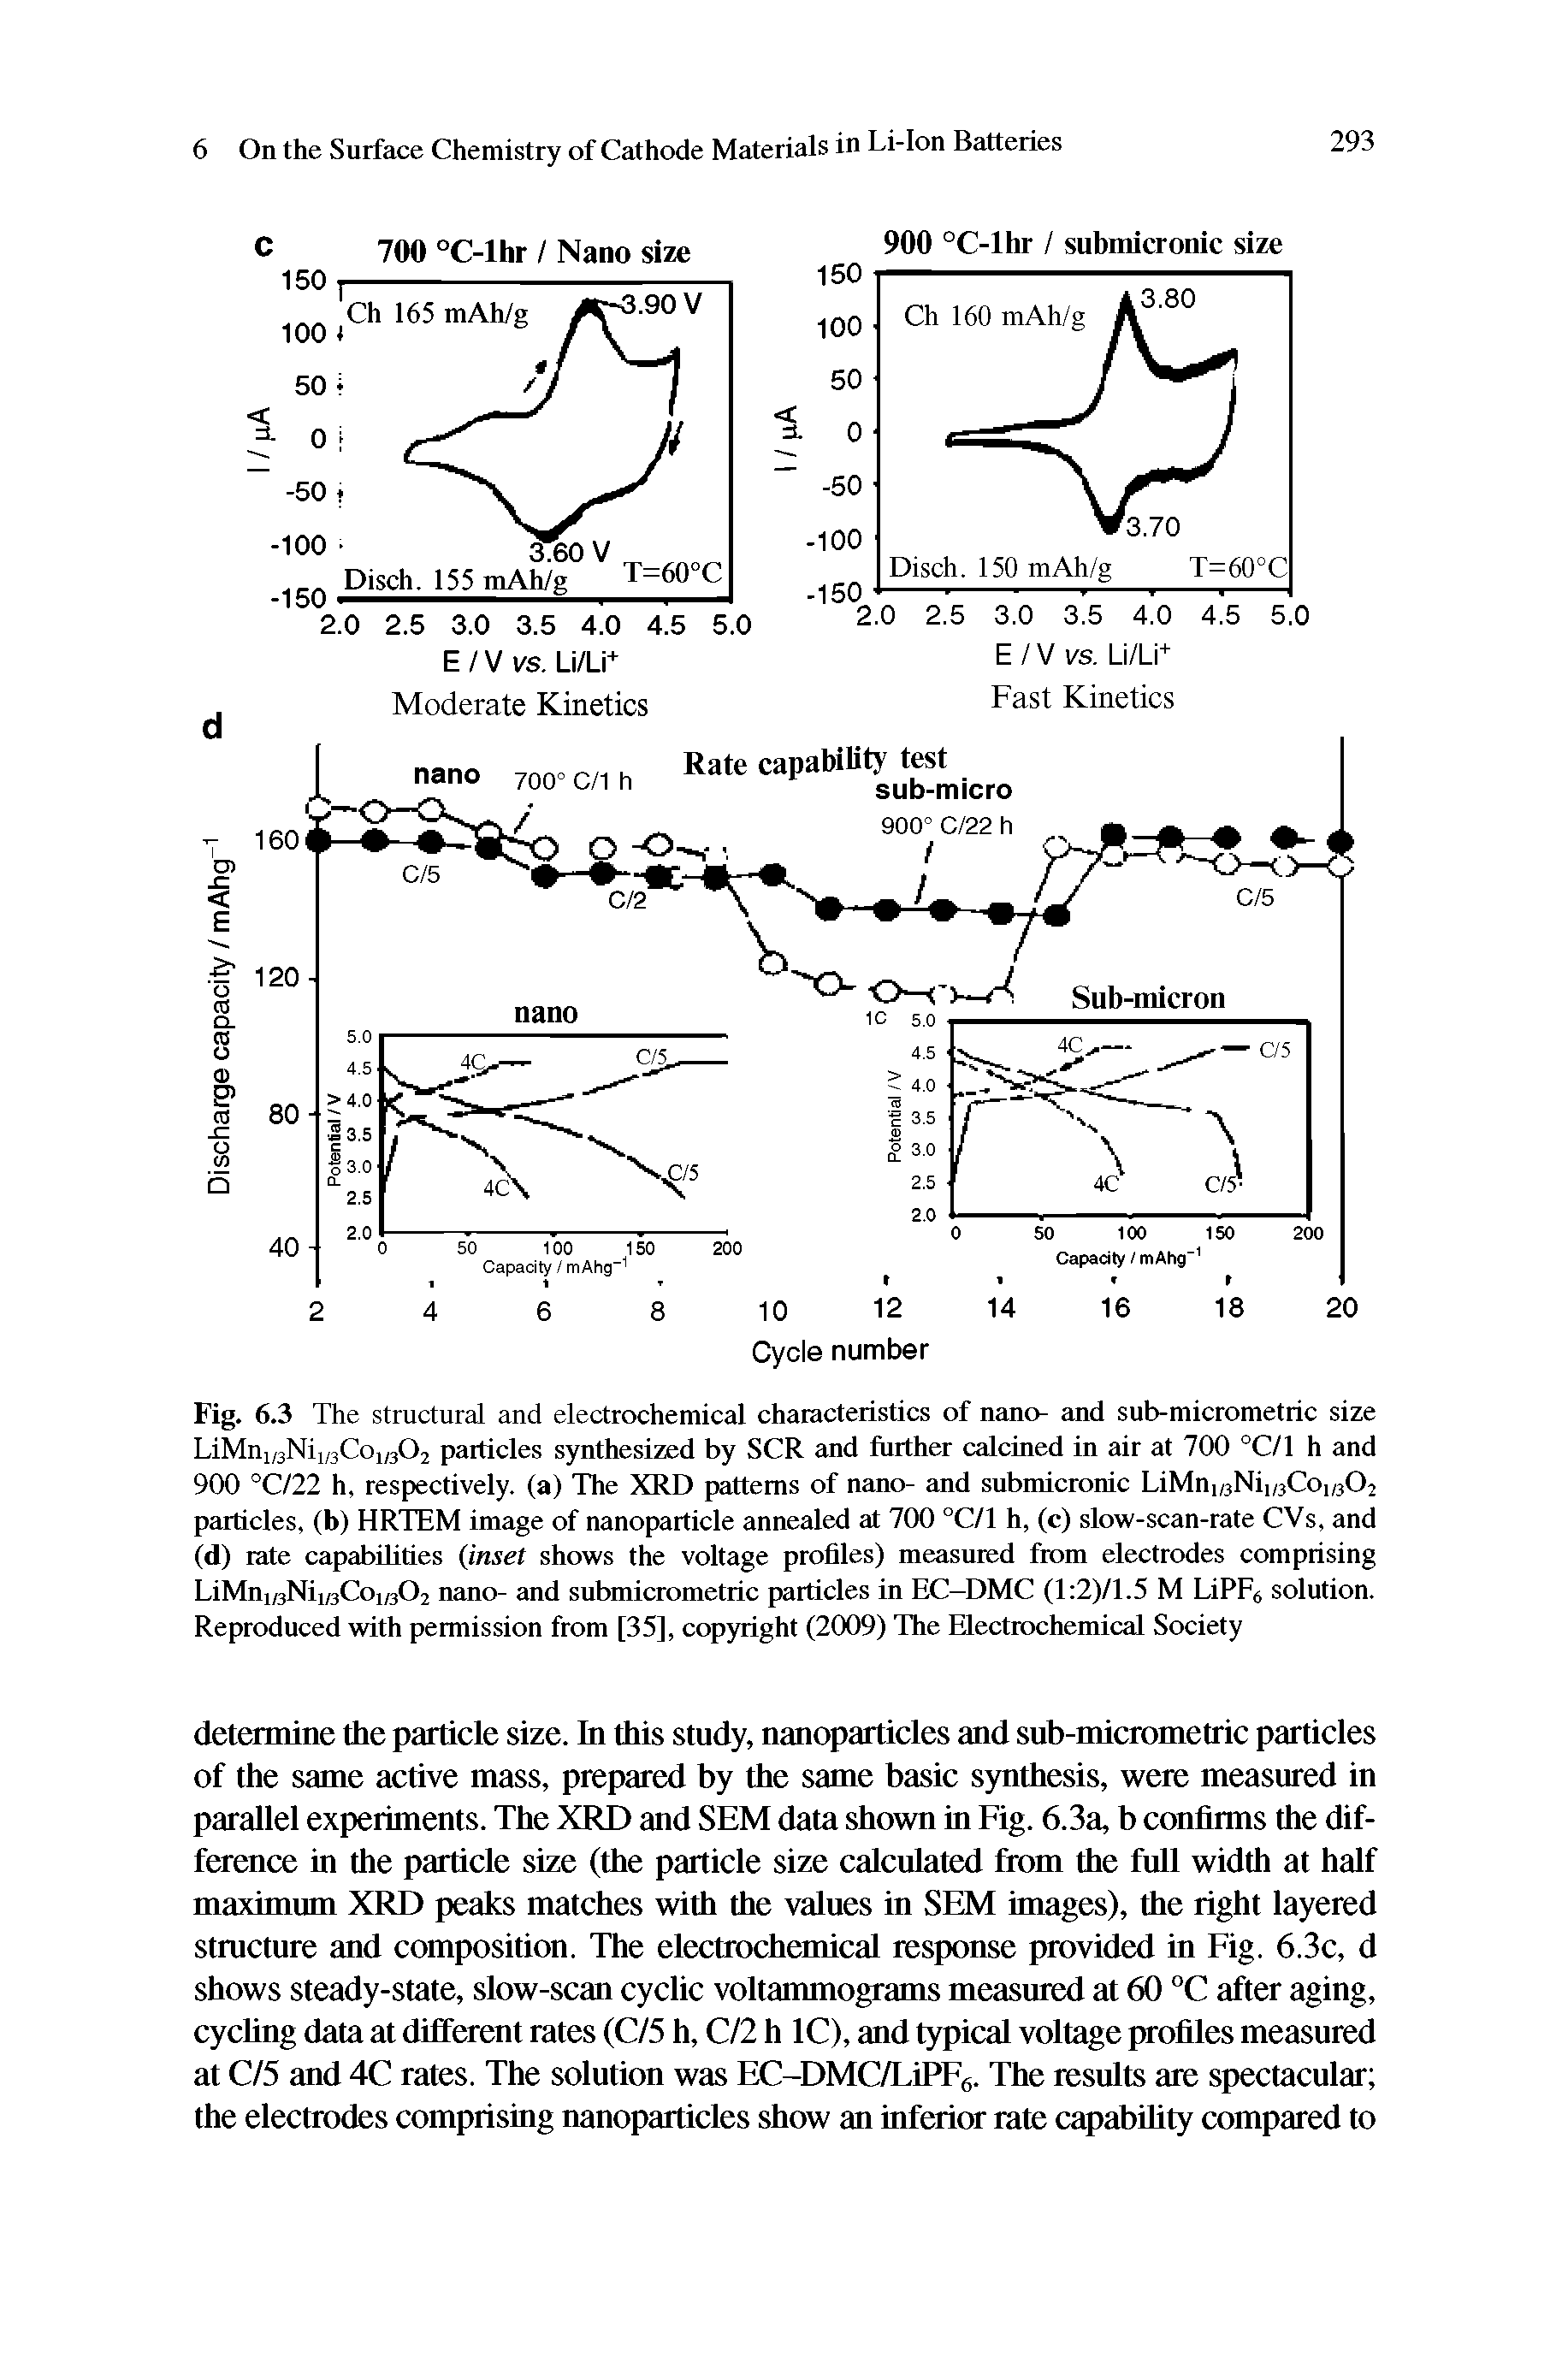 Fig. 6.3 The structural and electrochemical characteristics of nano- and sub-micrometric size LiMni,3Nii,3Coi,302 particles synthesized by SCR and further calcined in air at 700 °C/1 h and 900 °C/22 h, respectively, (a) The XRD patterns of nano- and submicronic LiMnioNiioCoiBOj particles, (b) HRTEM image of nanoparticle annealed at 700 °C/1 h, (c) slow-scan-rate CVs, and (d) rate capabUities inset shows the voltage profiles) measured from electrodes comprising LiMniBNiiaCoi 302 nano- and submicrometric particles in EC-DMC (1 2)/1.5 M LiPF solution. Reproduced with permission from [35], copyright (2009) The Electrochemical Society...